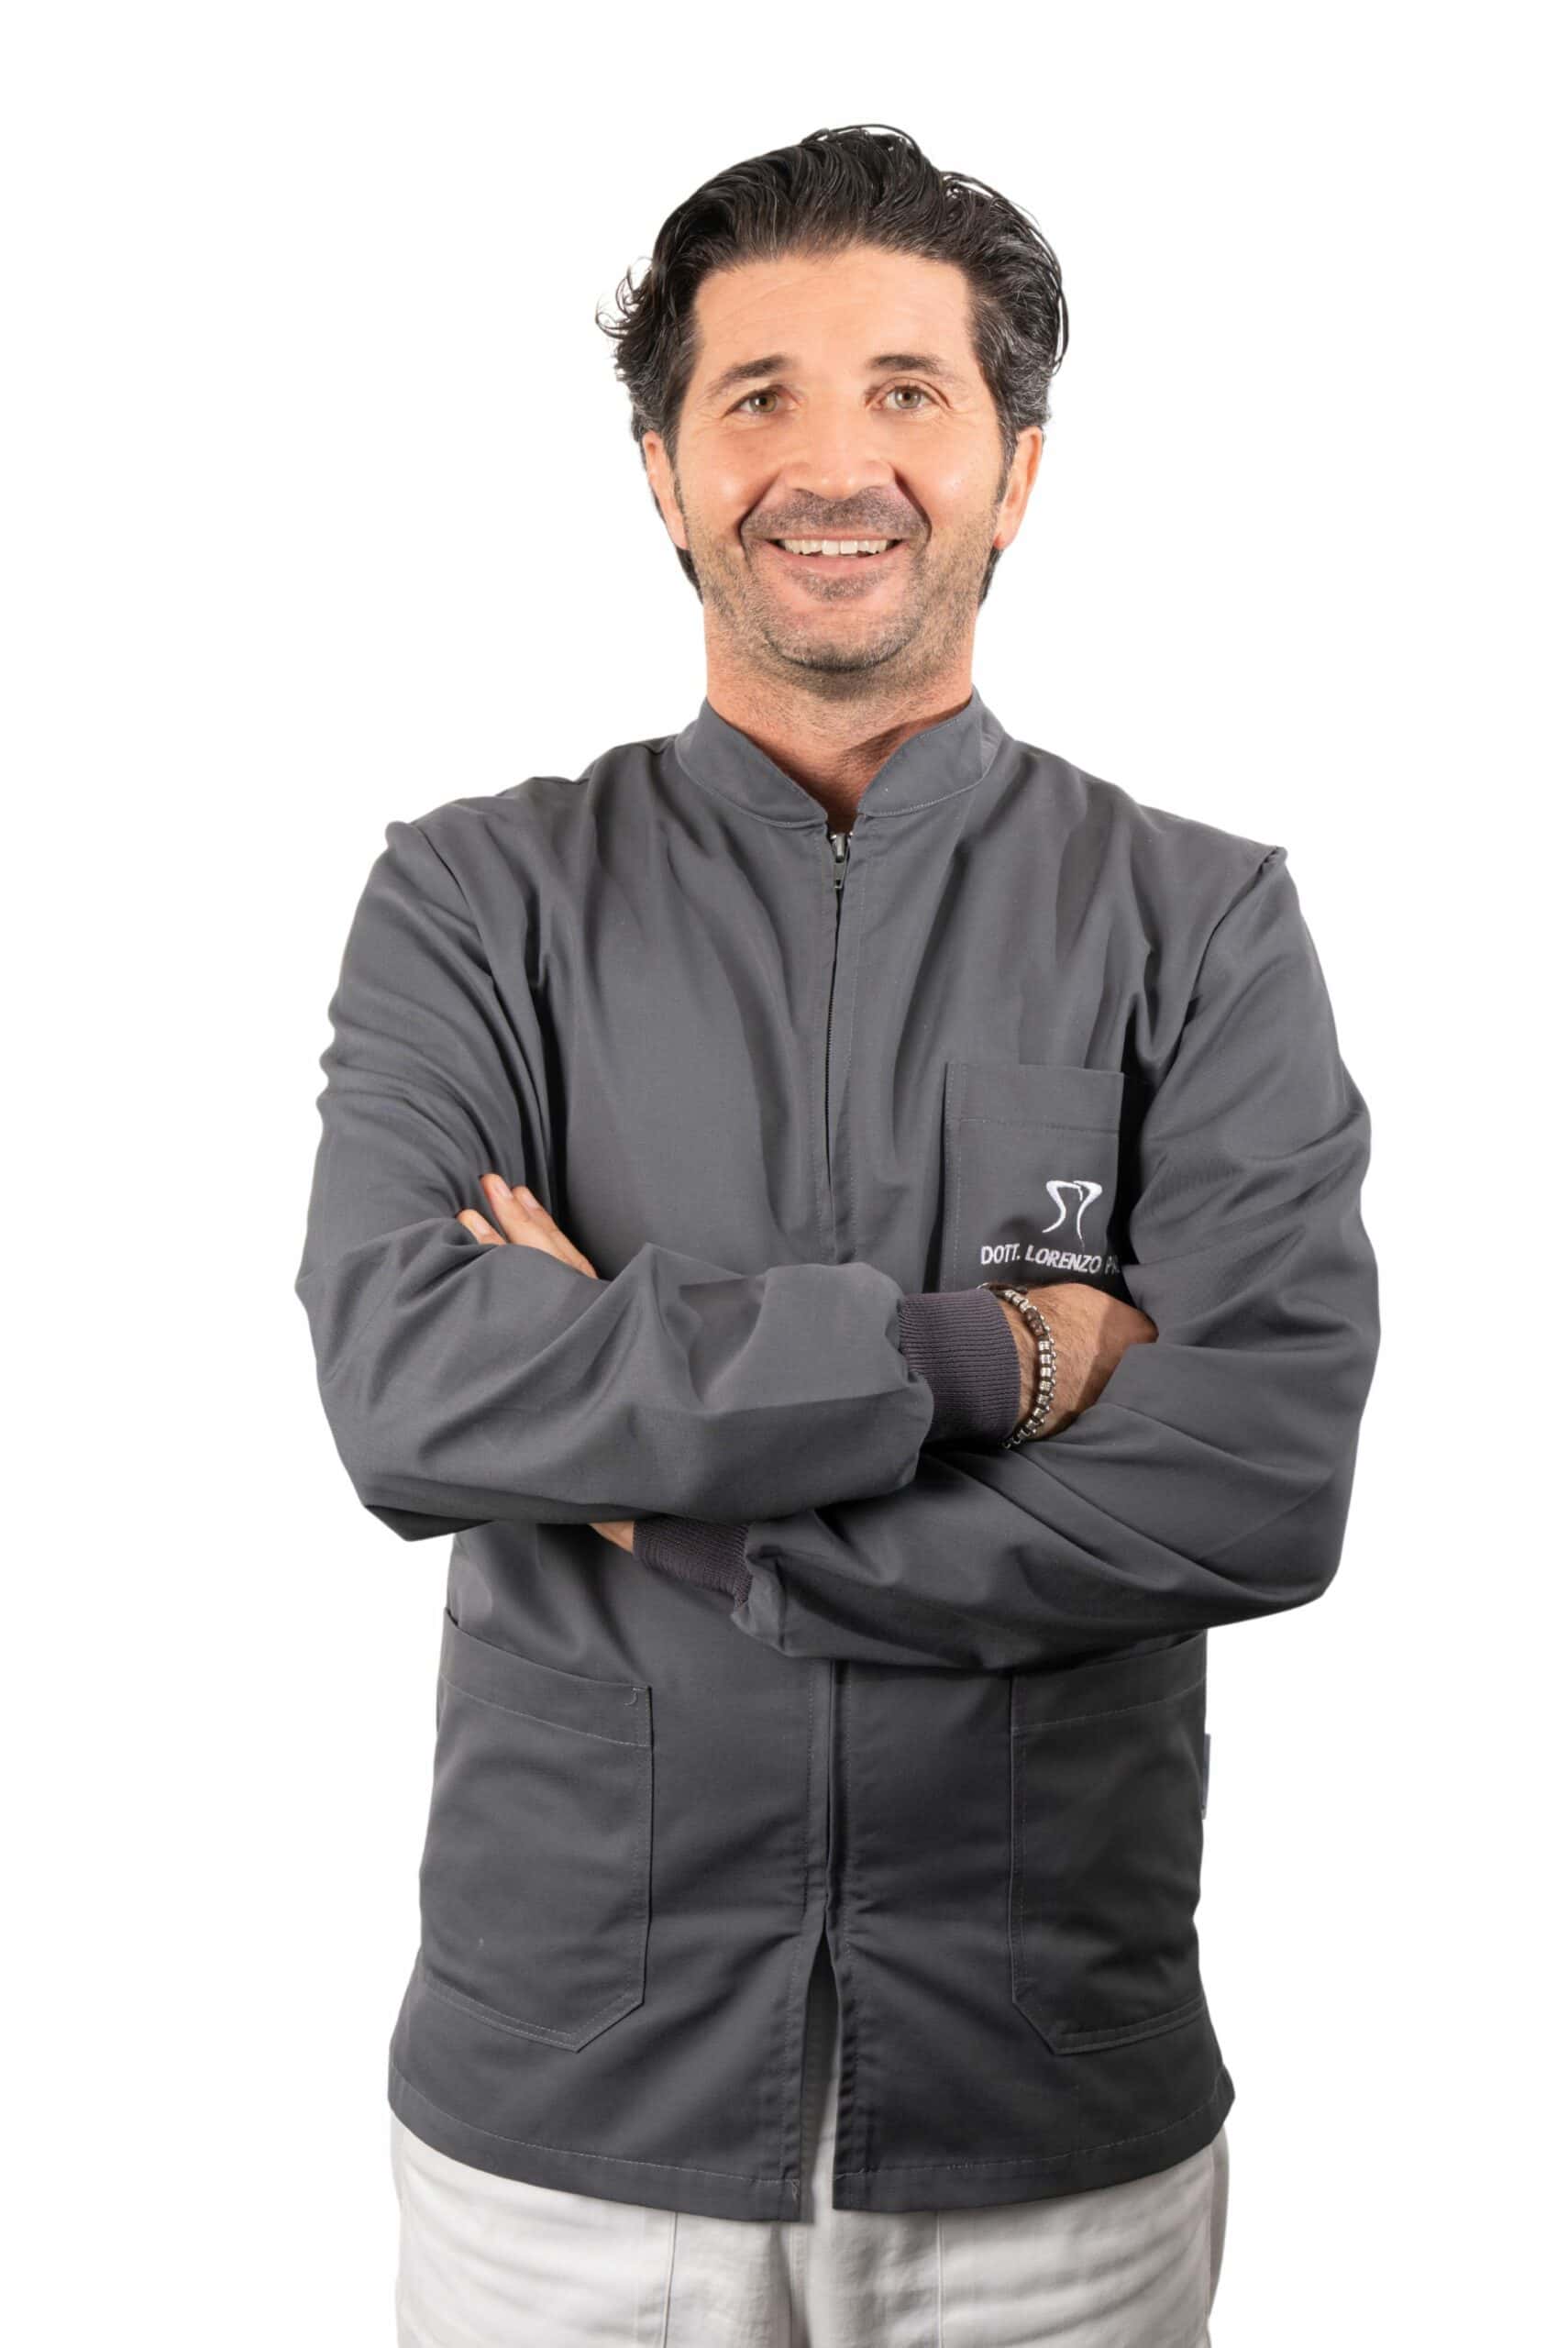 A man with dark hair, wearing a gray jacket and white pants, stands smiling with his arms crossed against a white background. He is a proud member of the Dentalmed Group.